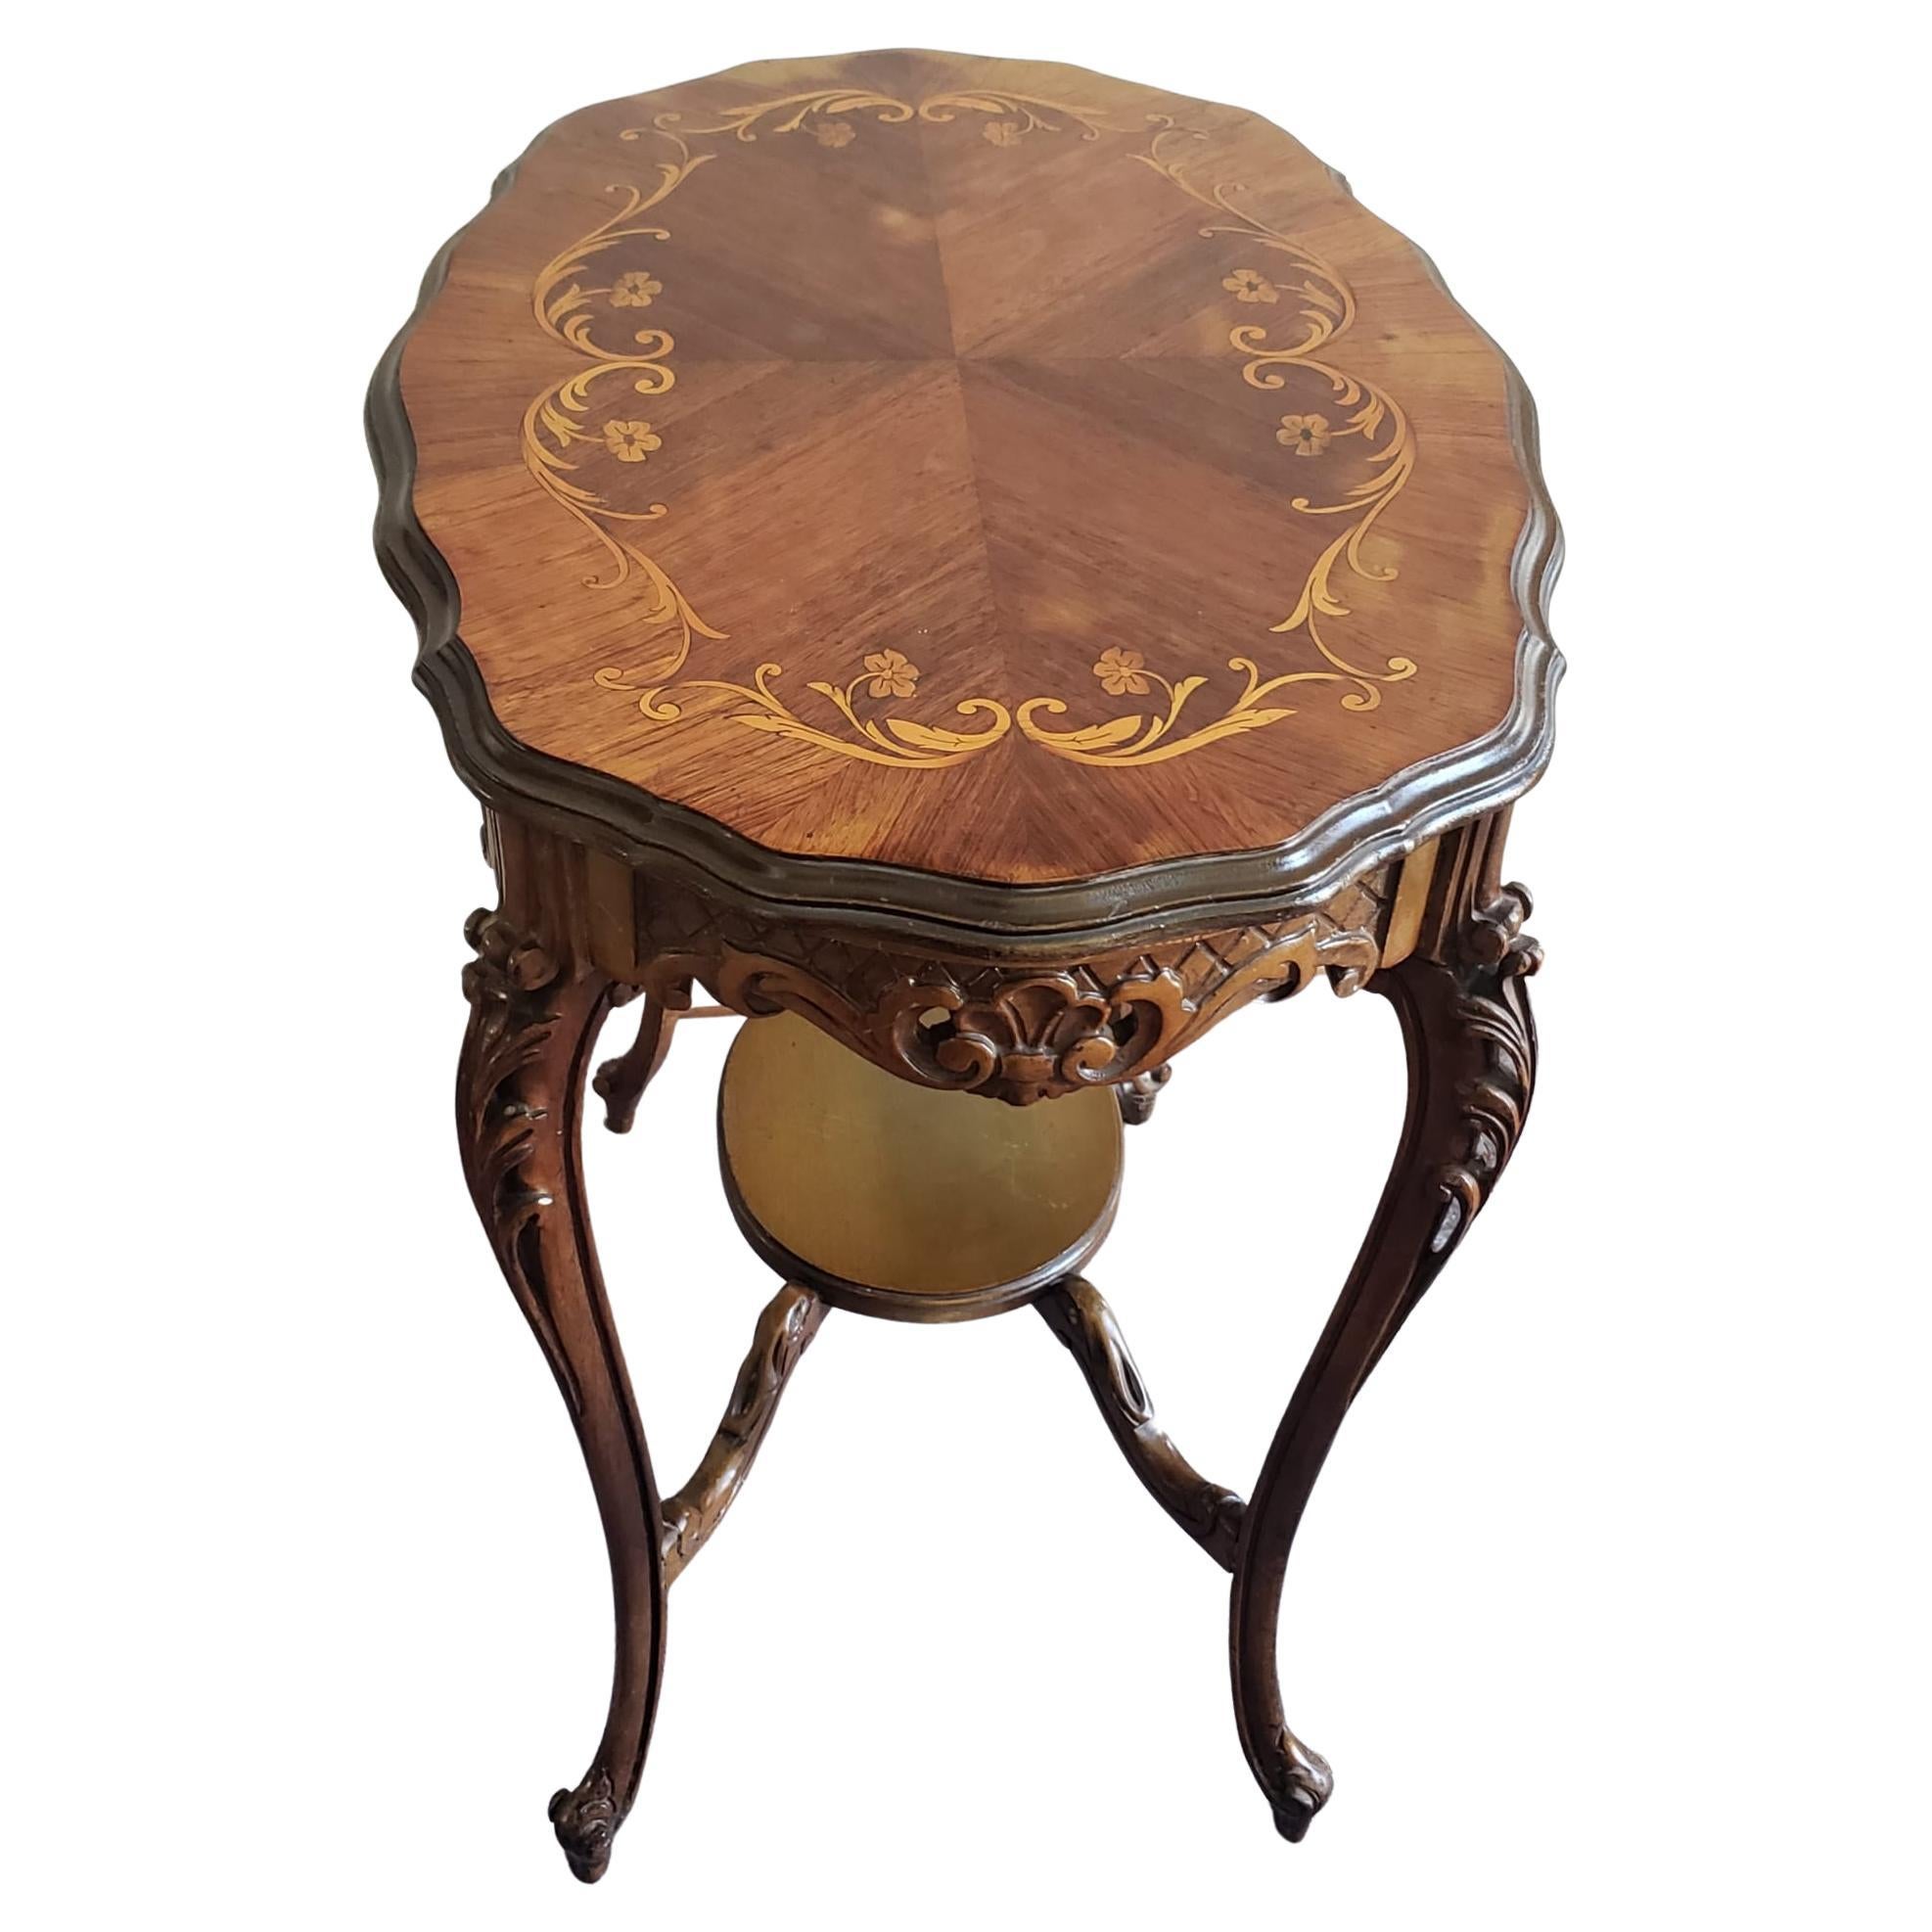 French Louis XIV Style Carved Mixed Marquetry Fruitwood Side Table.  Measures 19.5